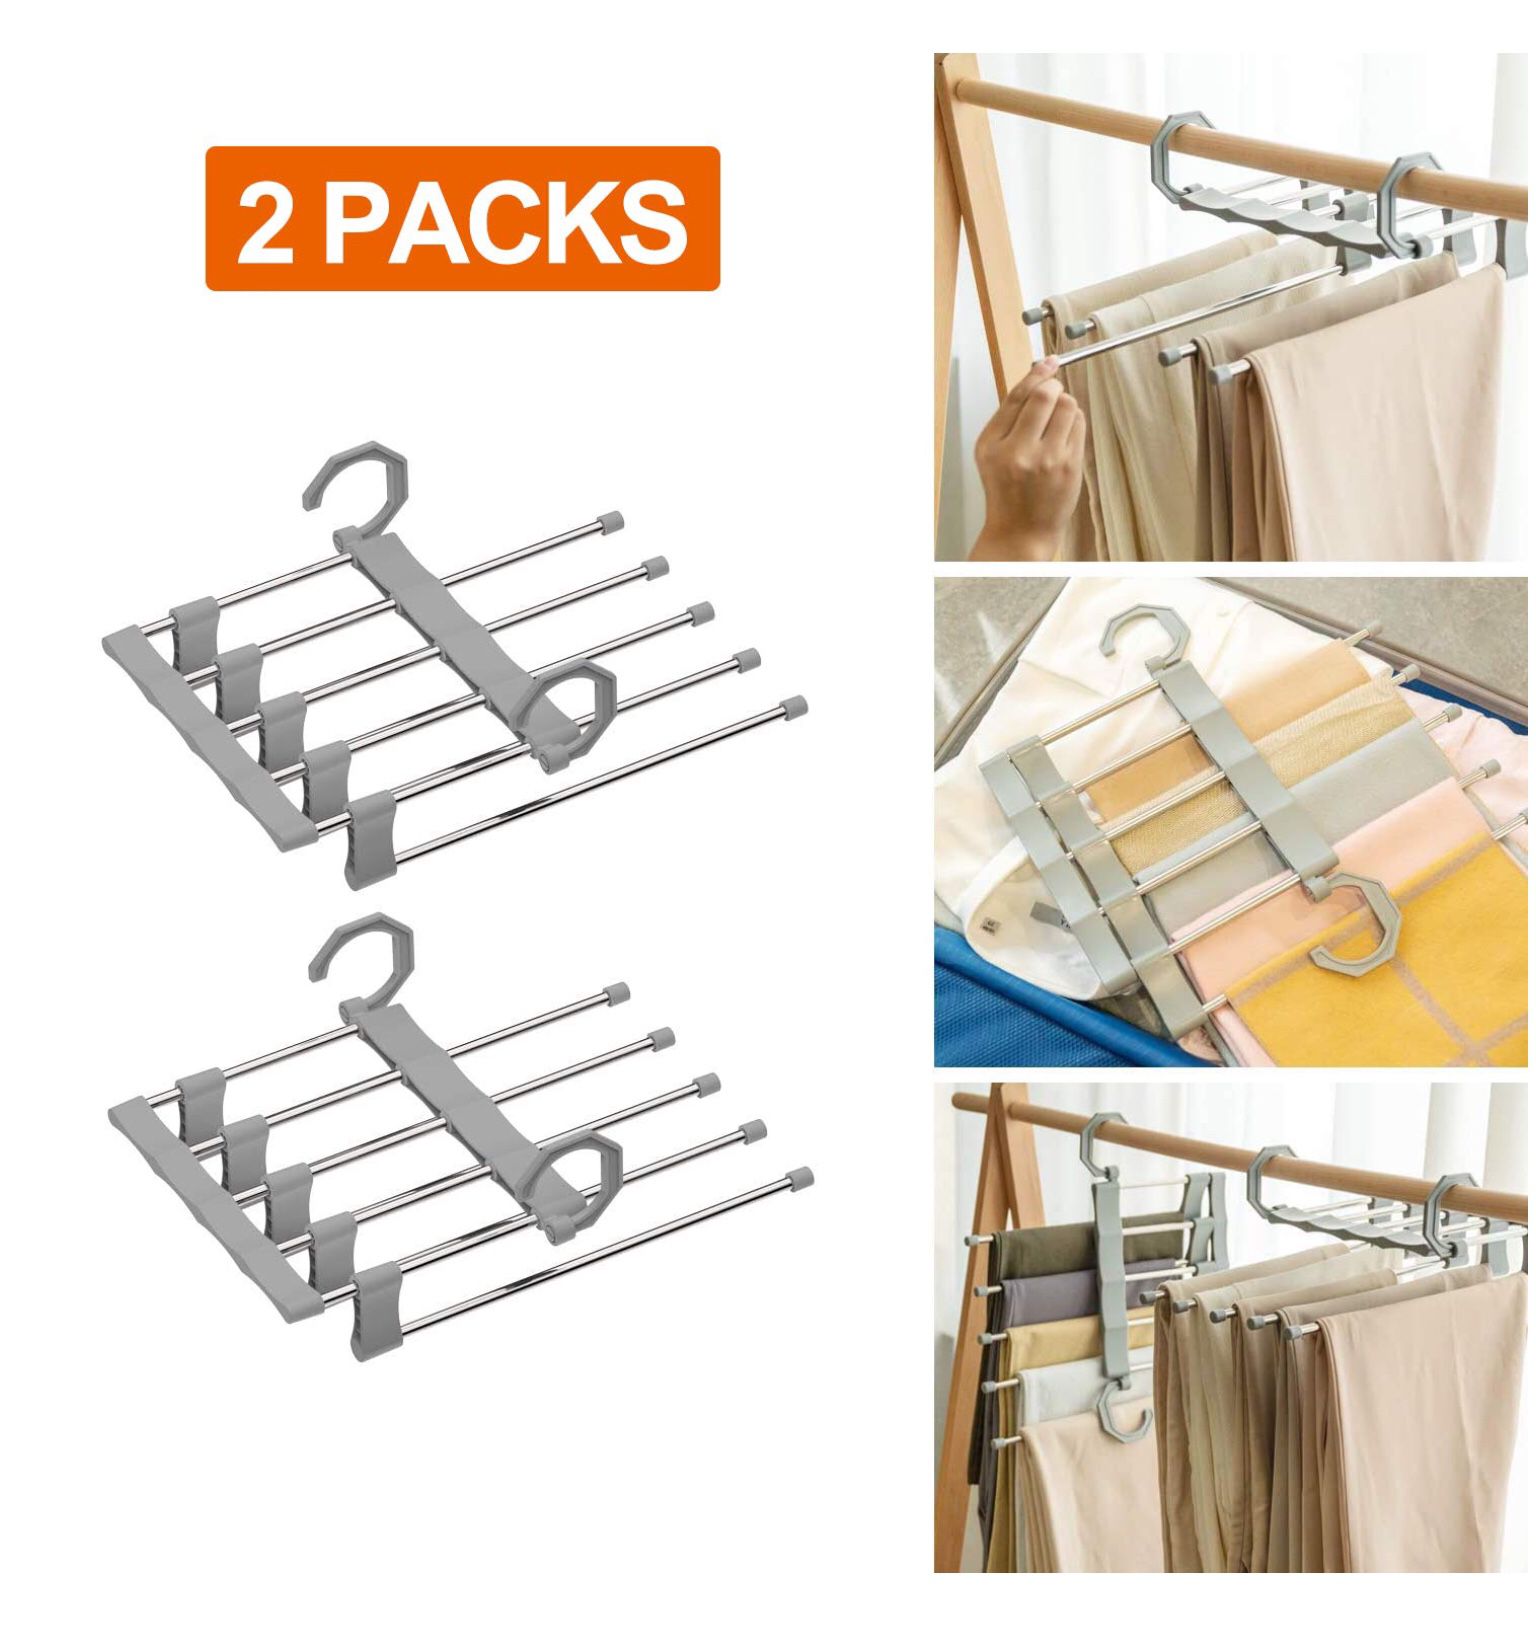 Hangers Space Saving Stainless Steel Trousers Hangers S-Shape Clothes Hangers Open Ended Closet Organizer for Pants Jeans (White or Gray, 2 Pack)